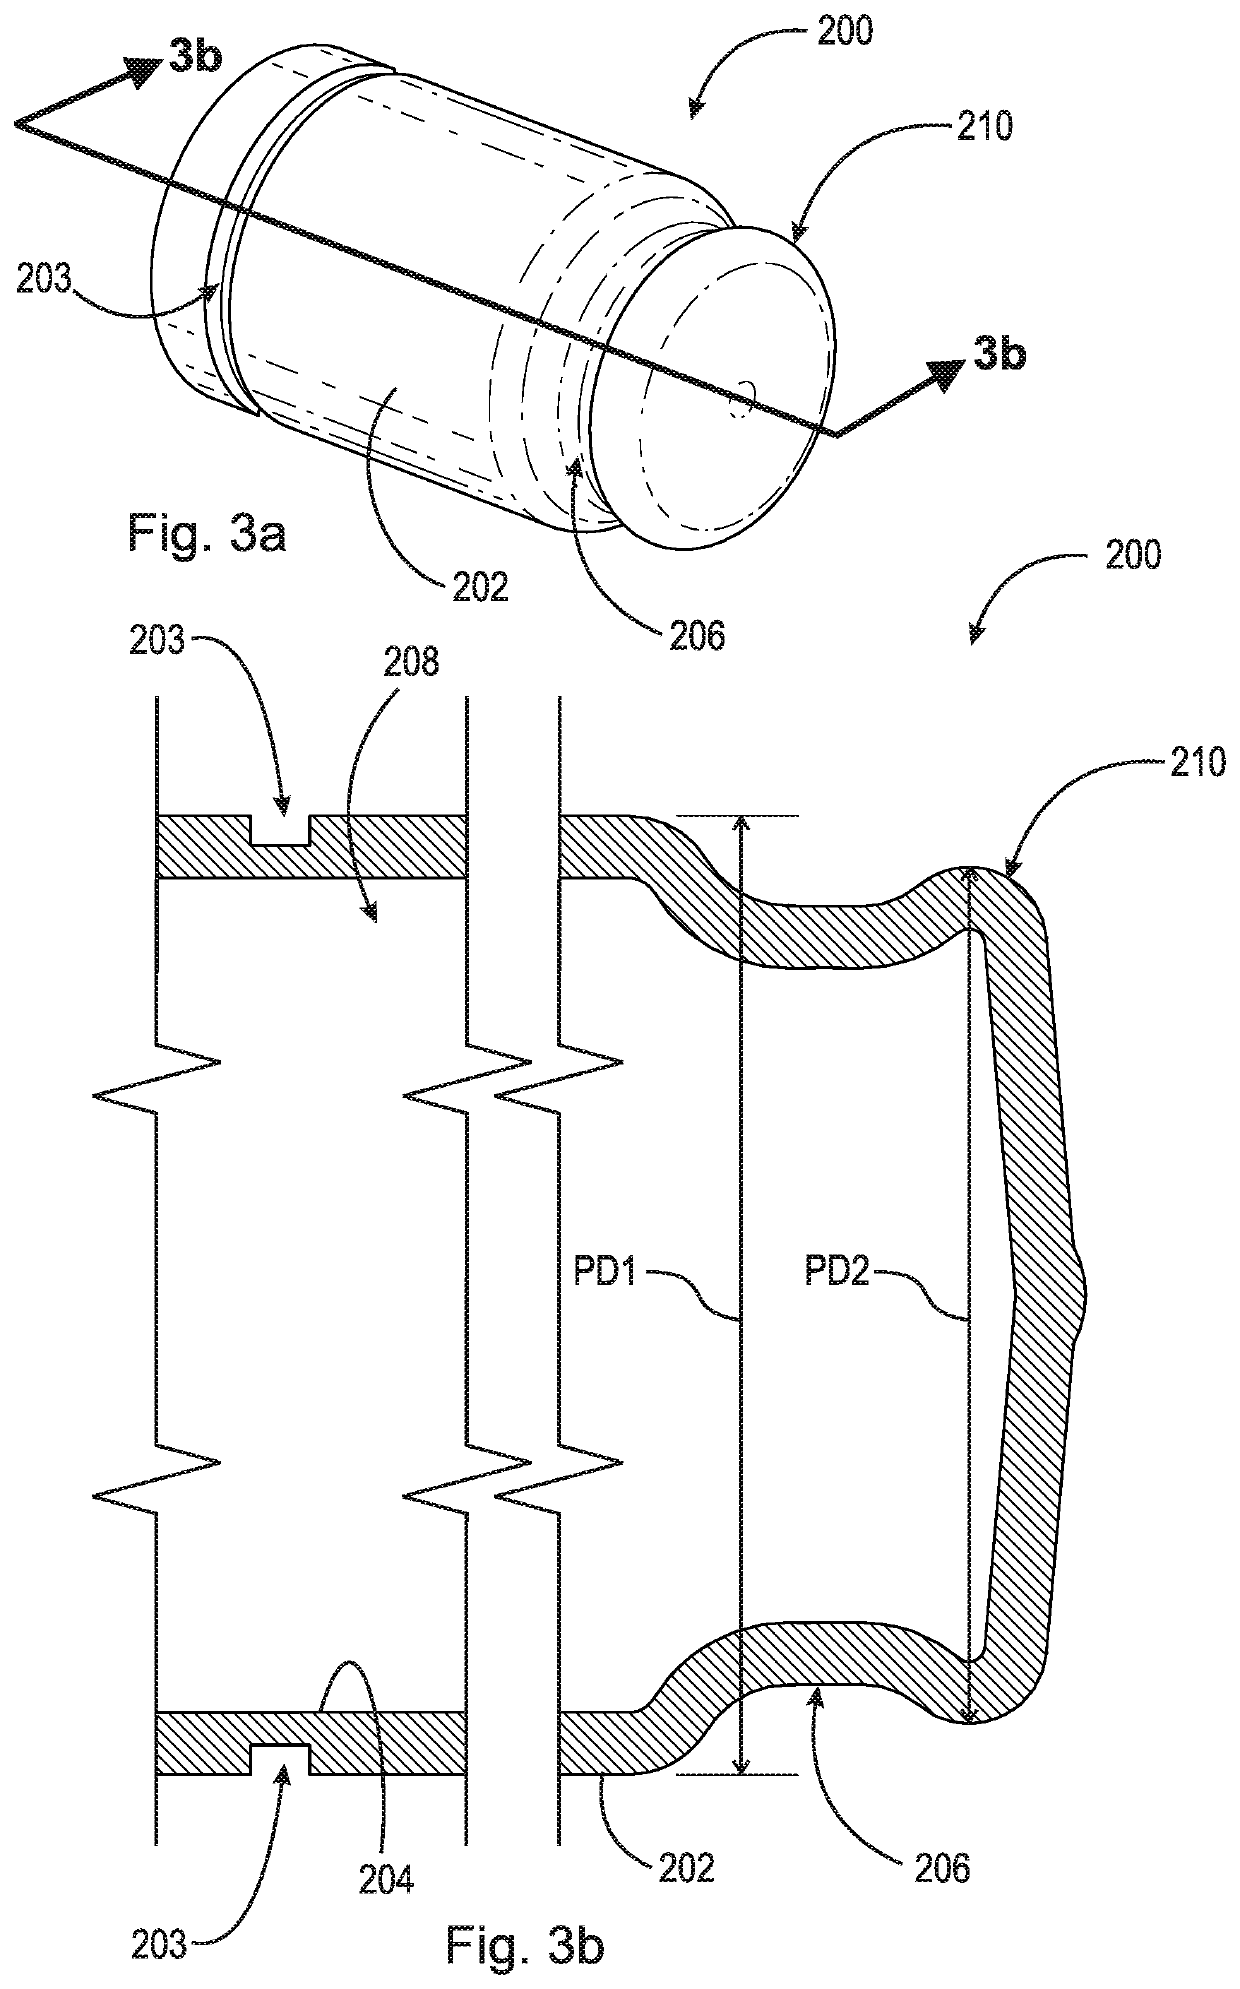 Fluid connector having a deformable tab and plug/connector assembly